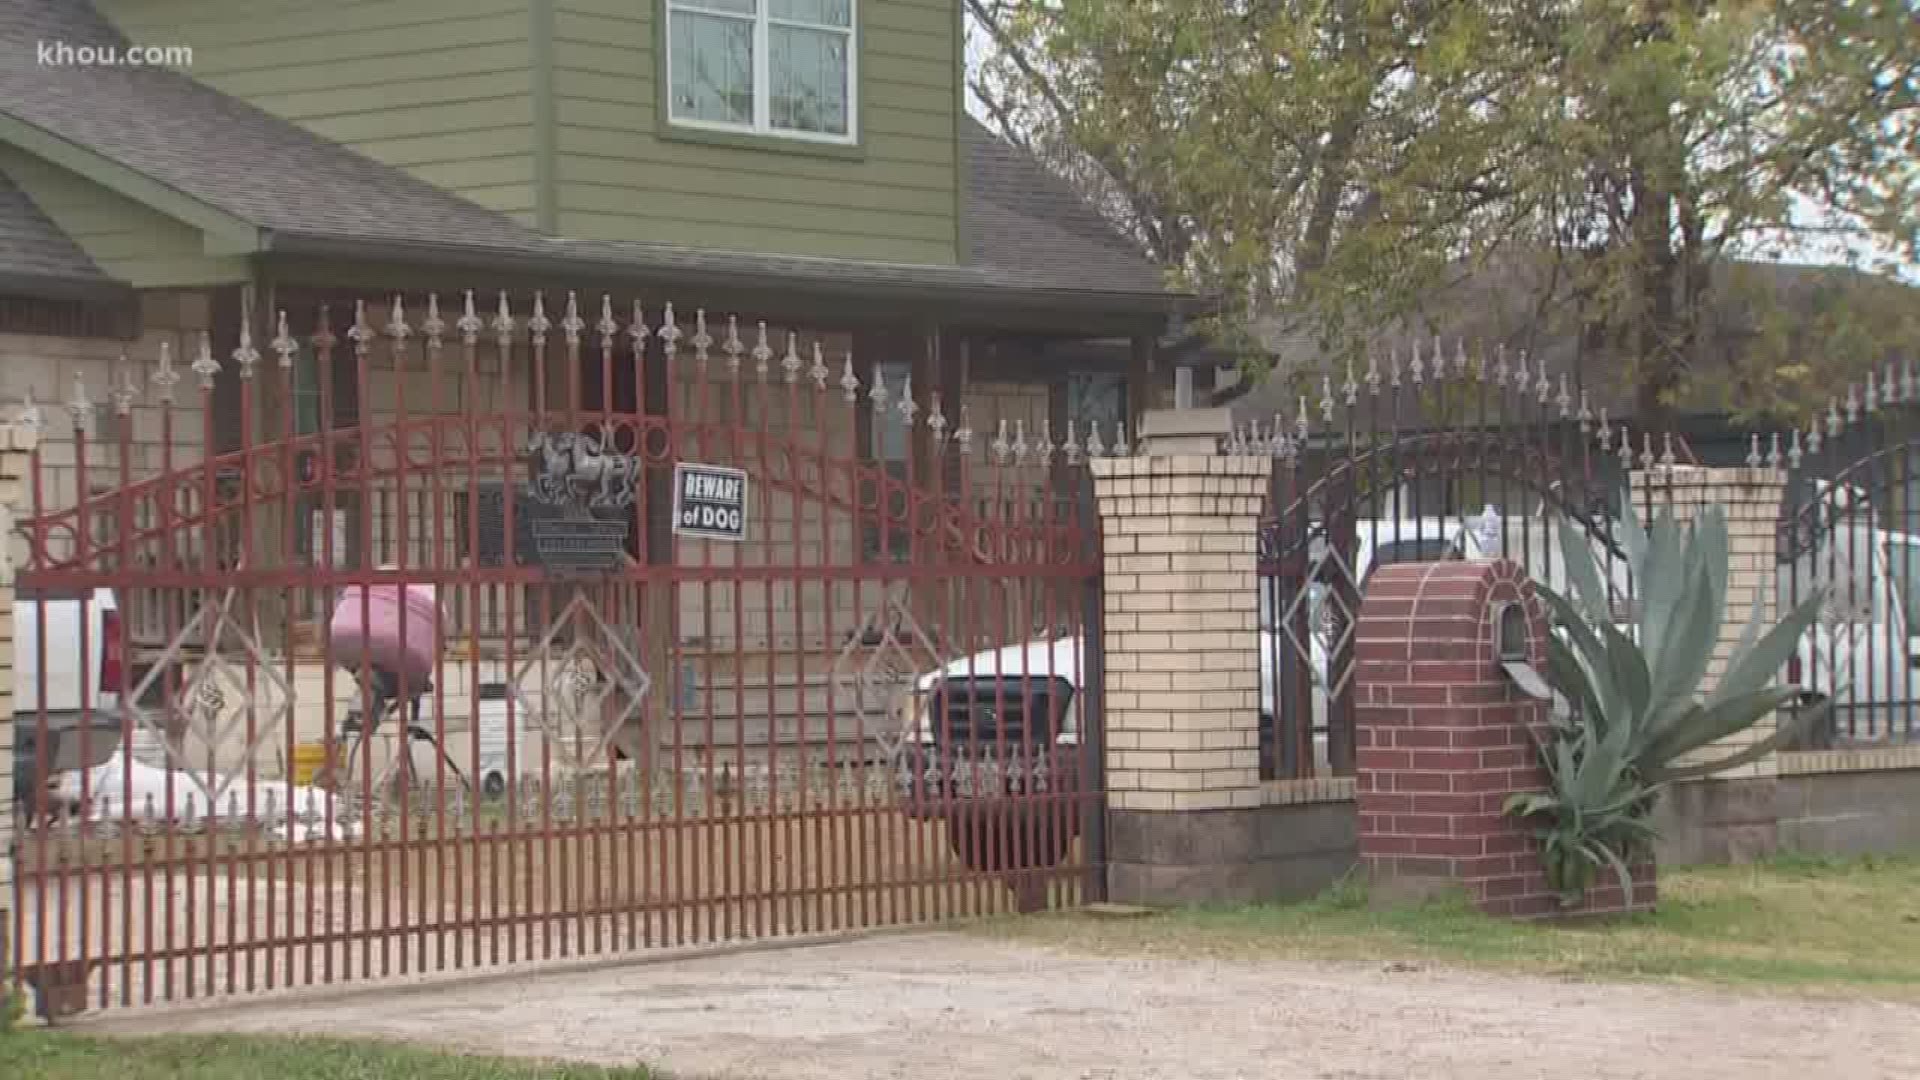 Houston Police said one woman was killed and another was severely injured after a "vicious" dog attack in north Houston early Saturday morning.